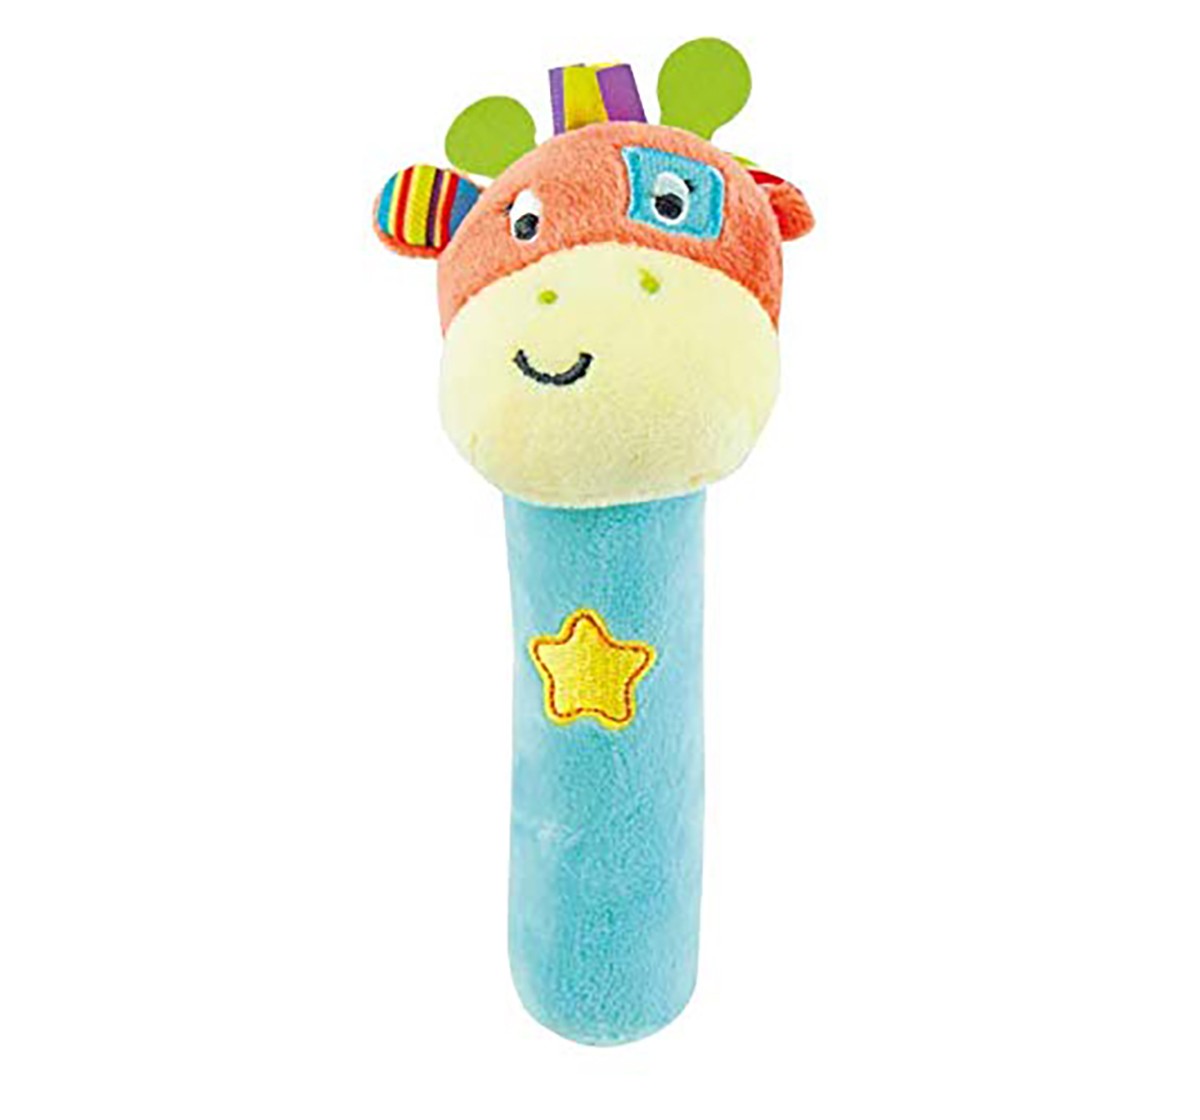 Winfun patch the giraffe rattle stick New Born for Kids age 0M+ 